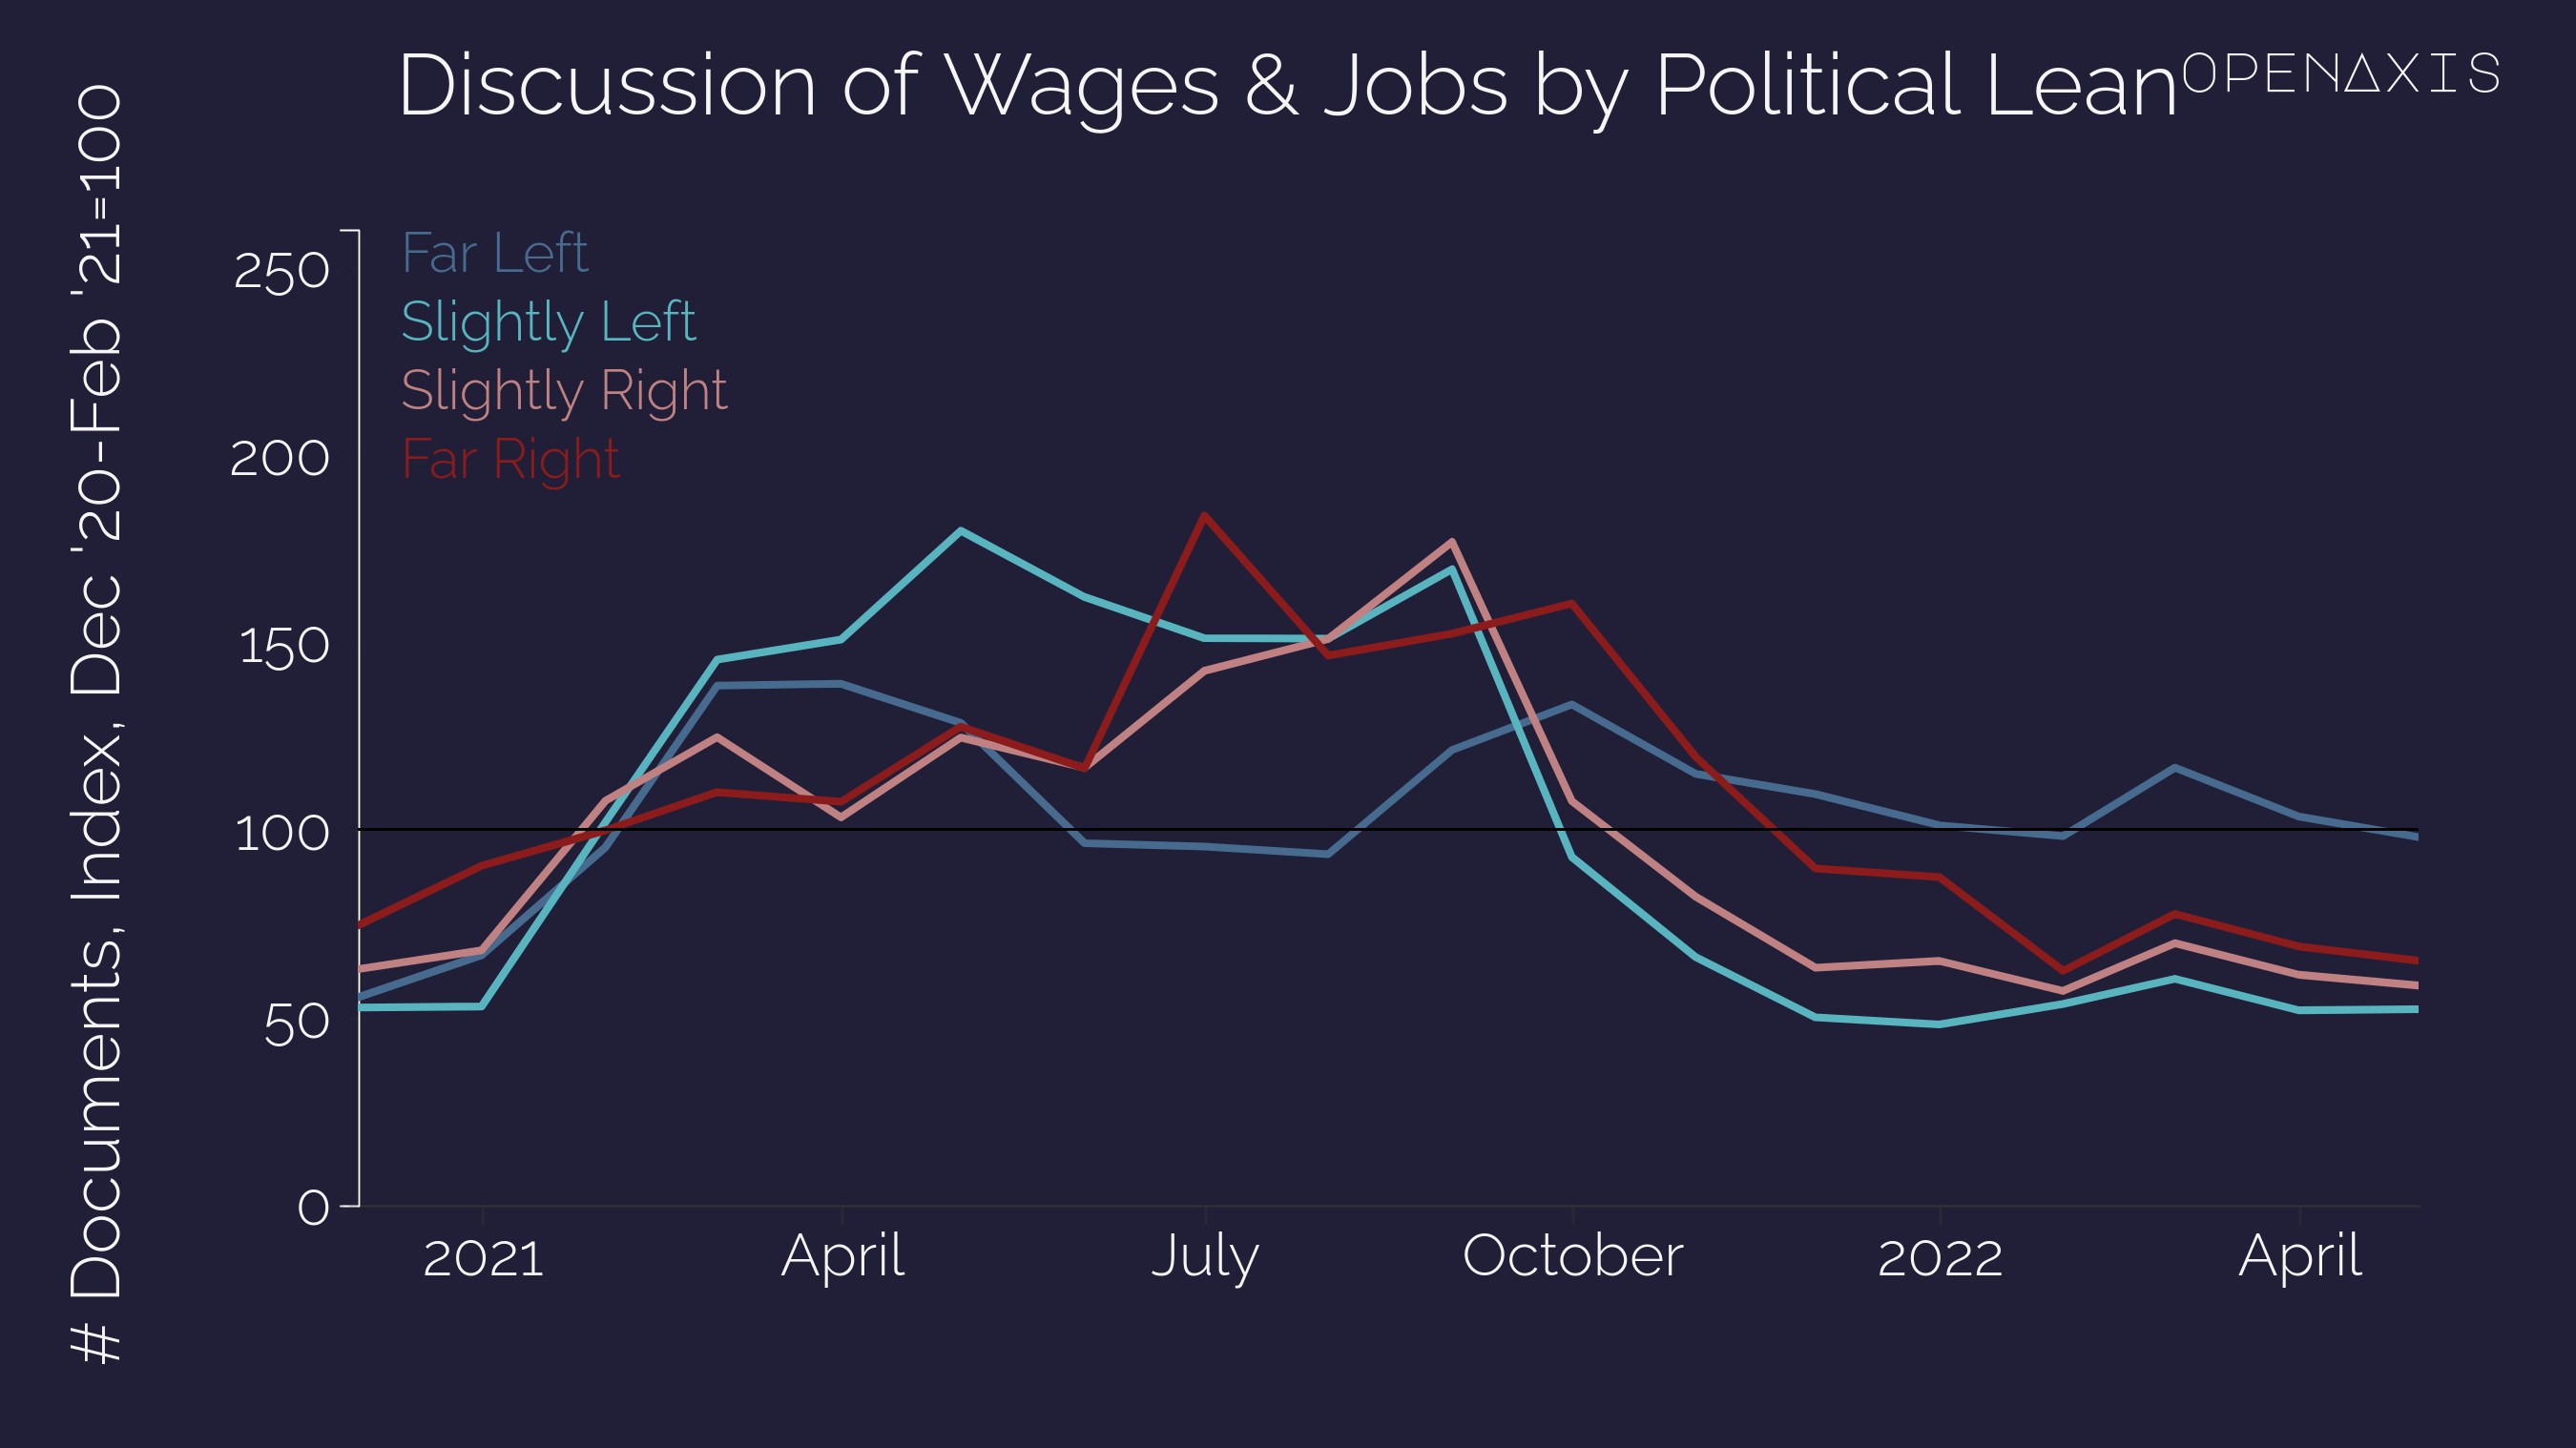 "Discussion of Wages & Jobs by Political Lean"